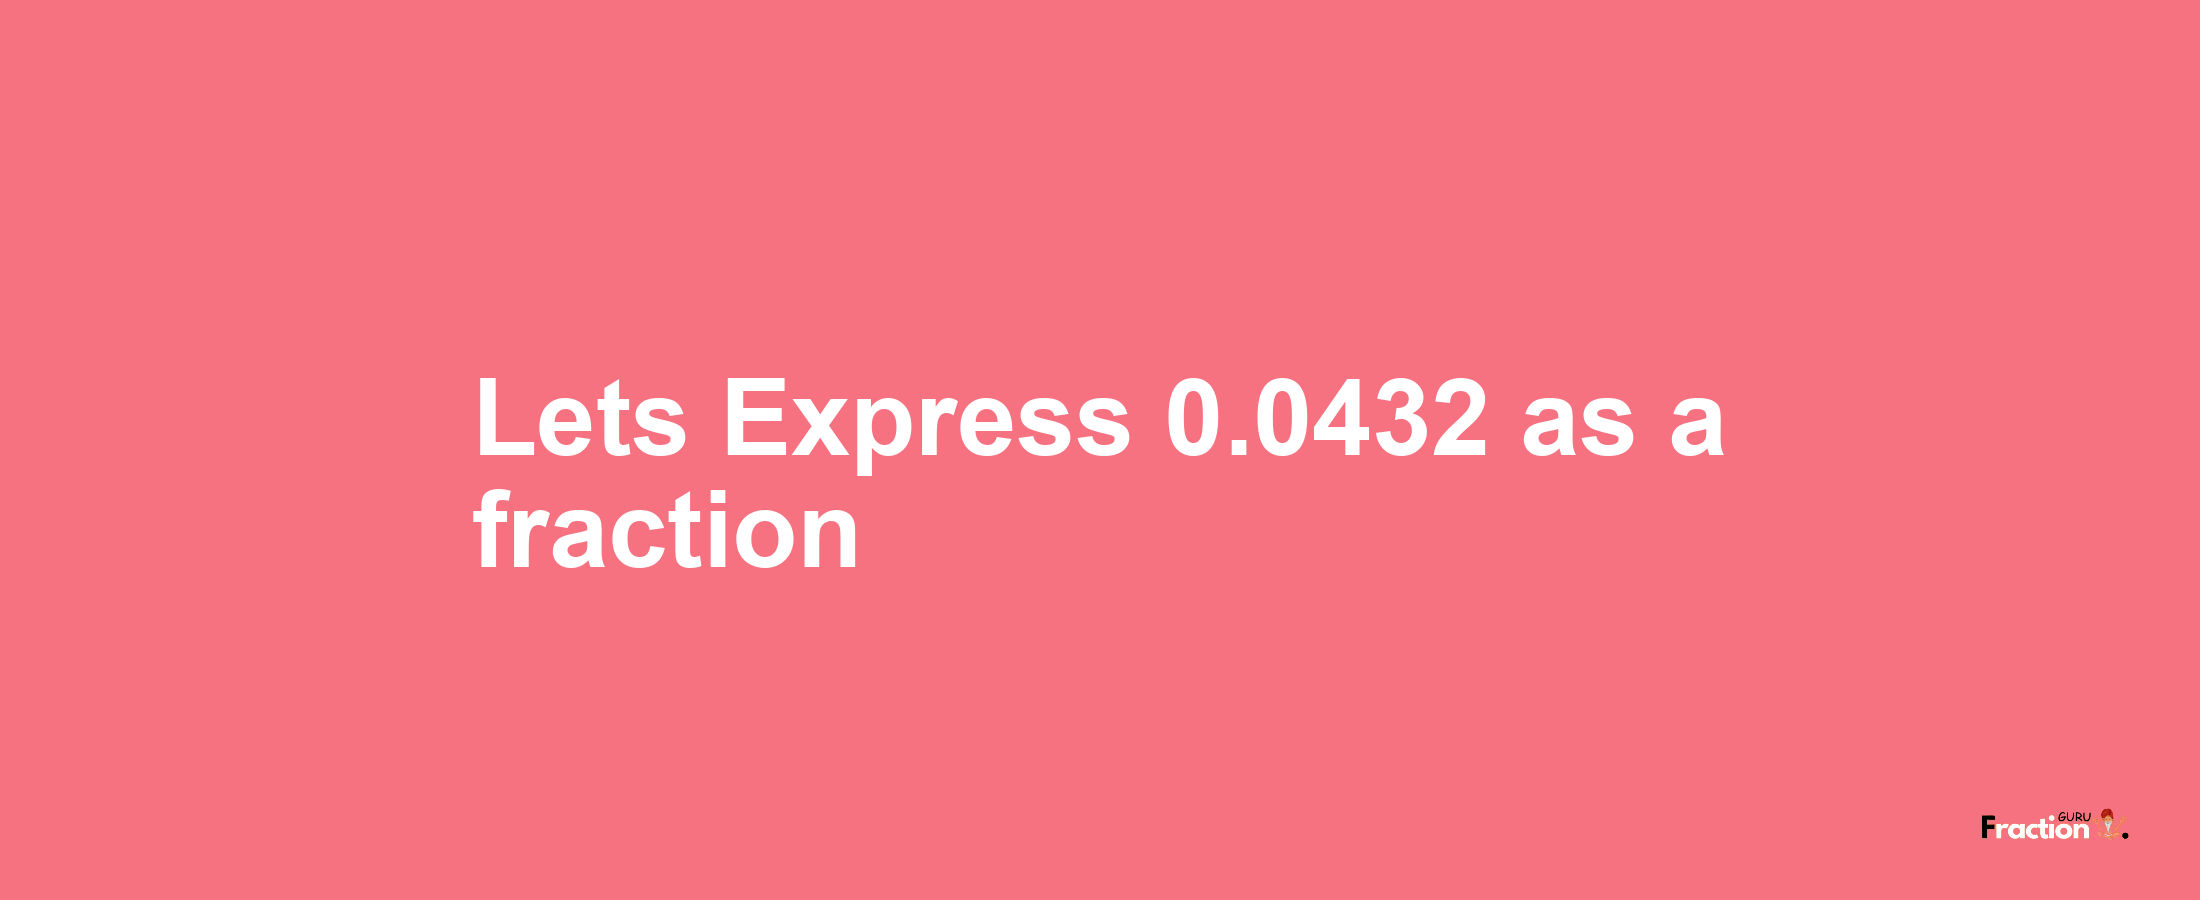 Lets Express 0.0432 as afraction